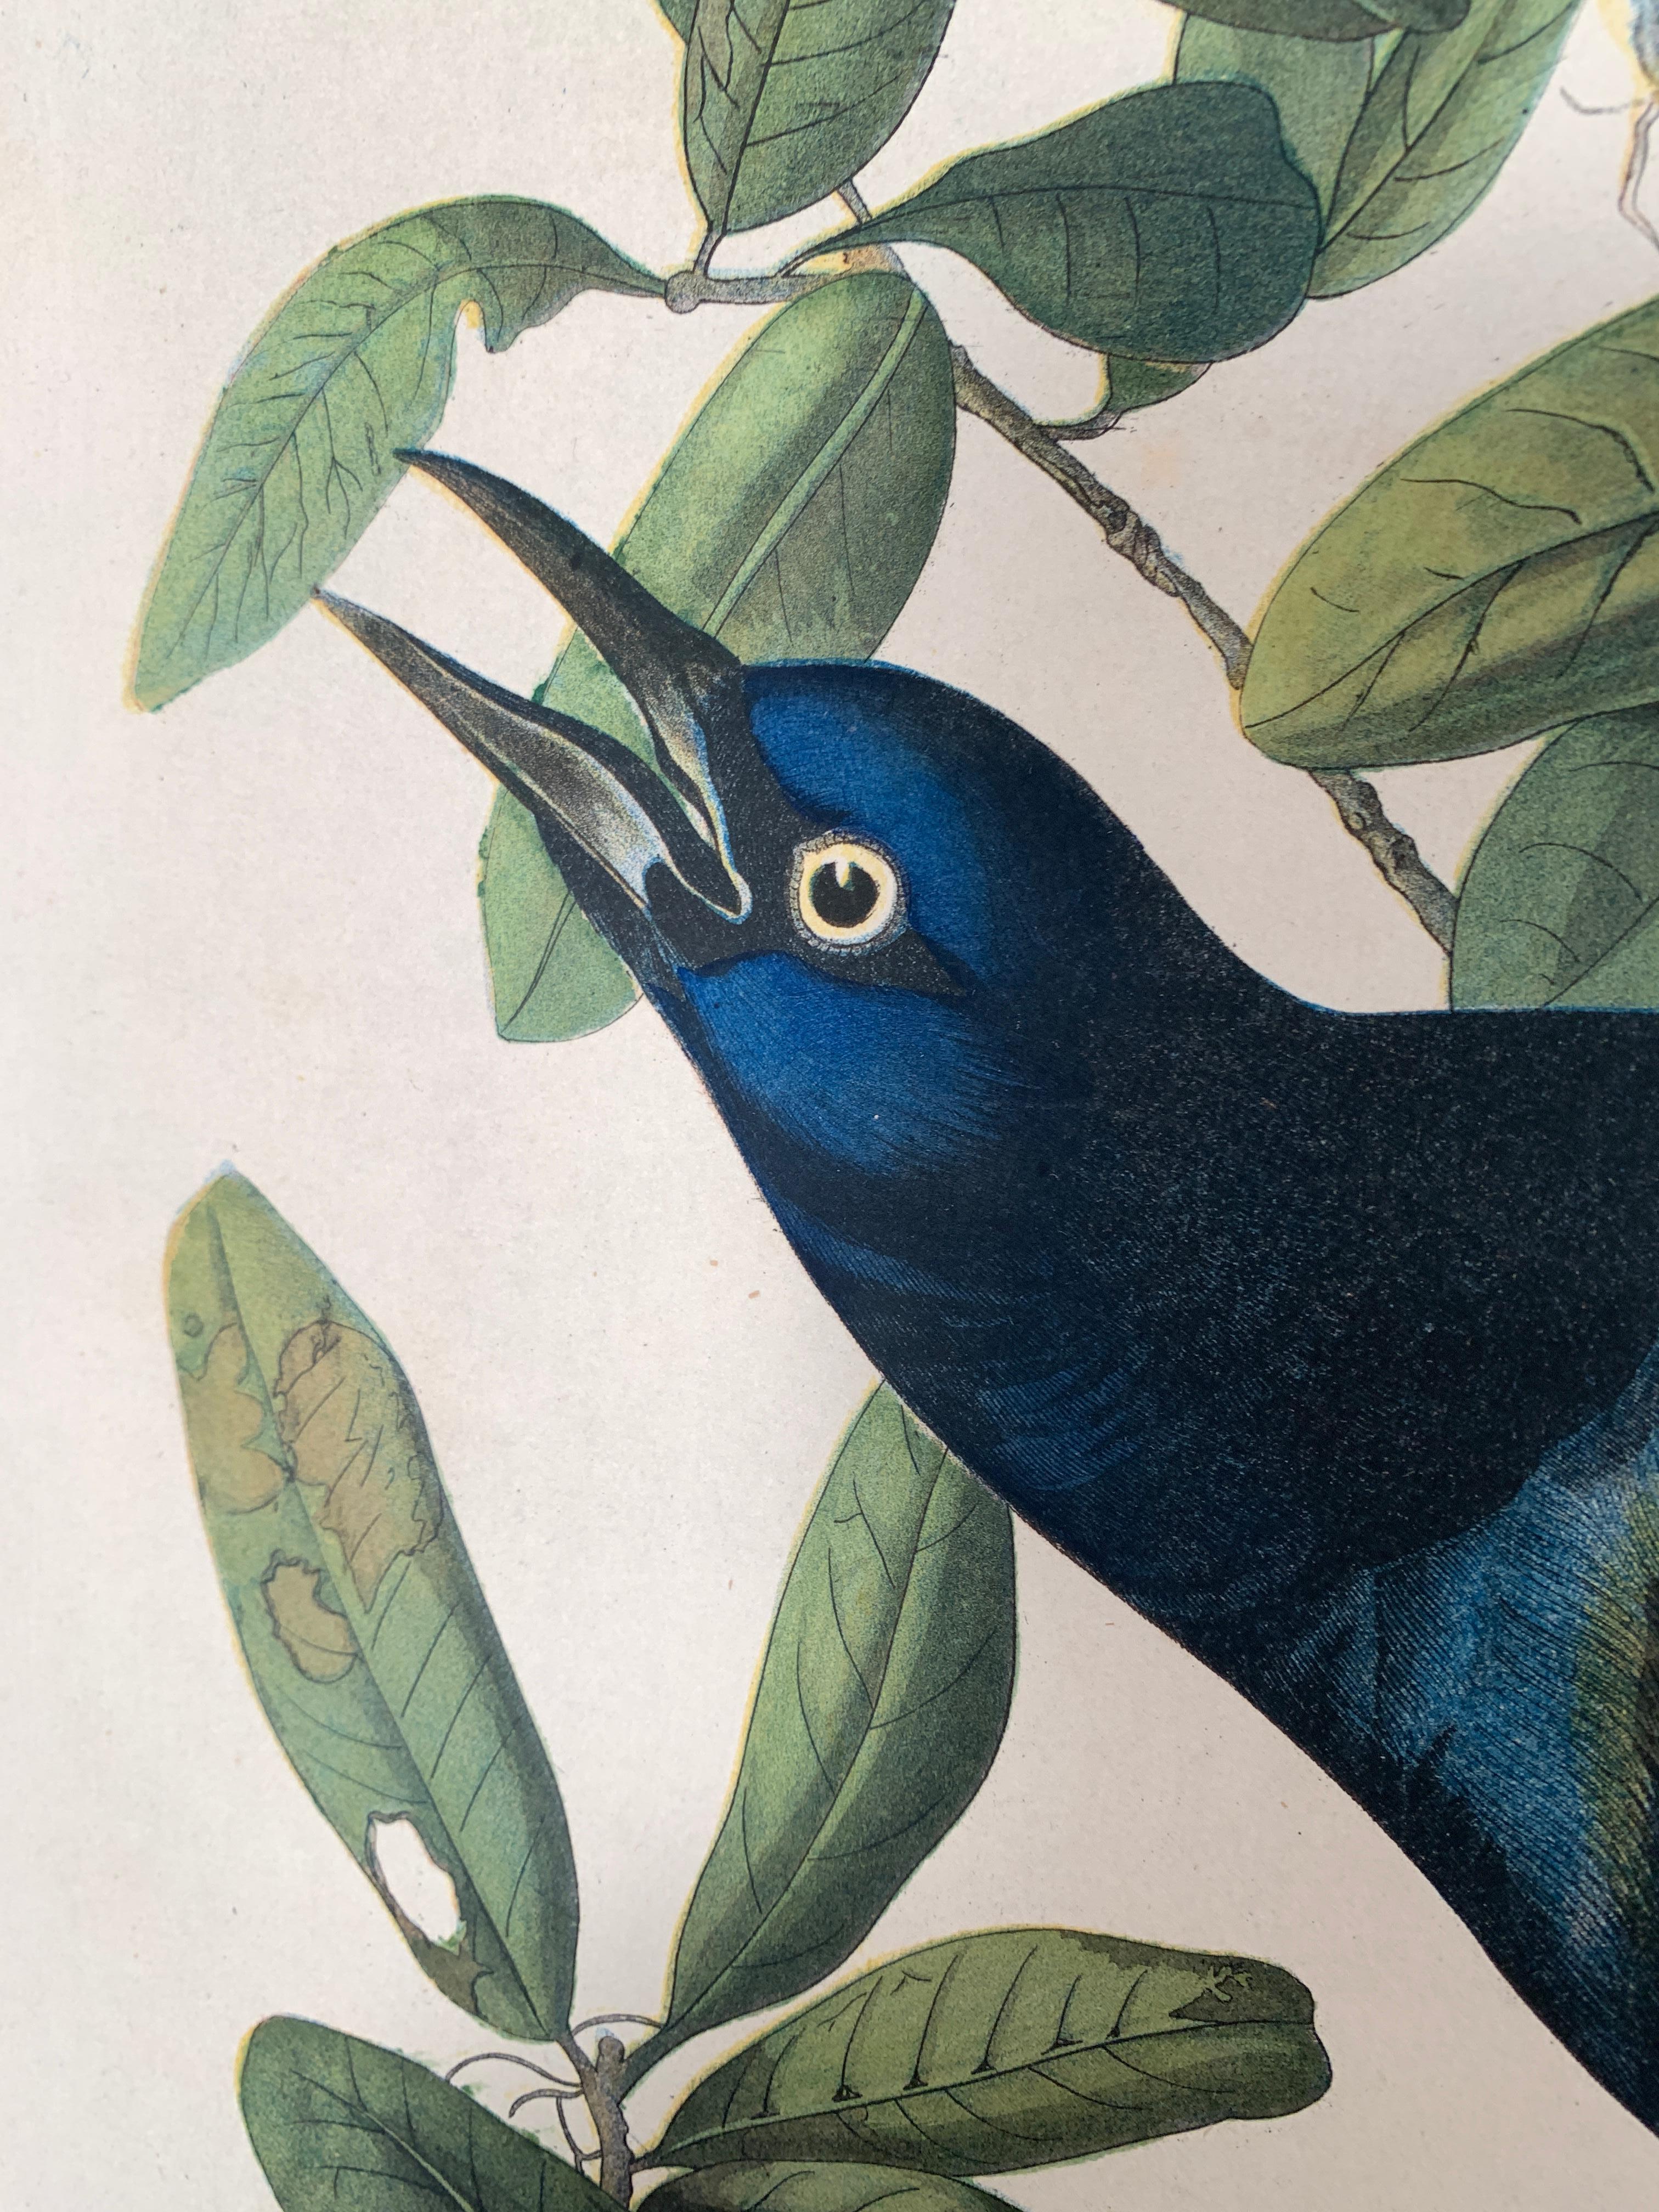 Boat-tailed Grackle, from the Bien edition of Birds of America - Print by John James Audubon